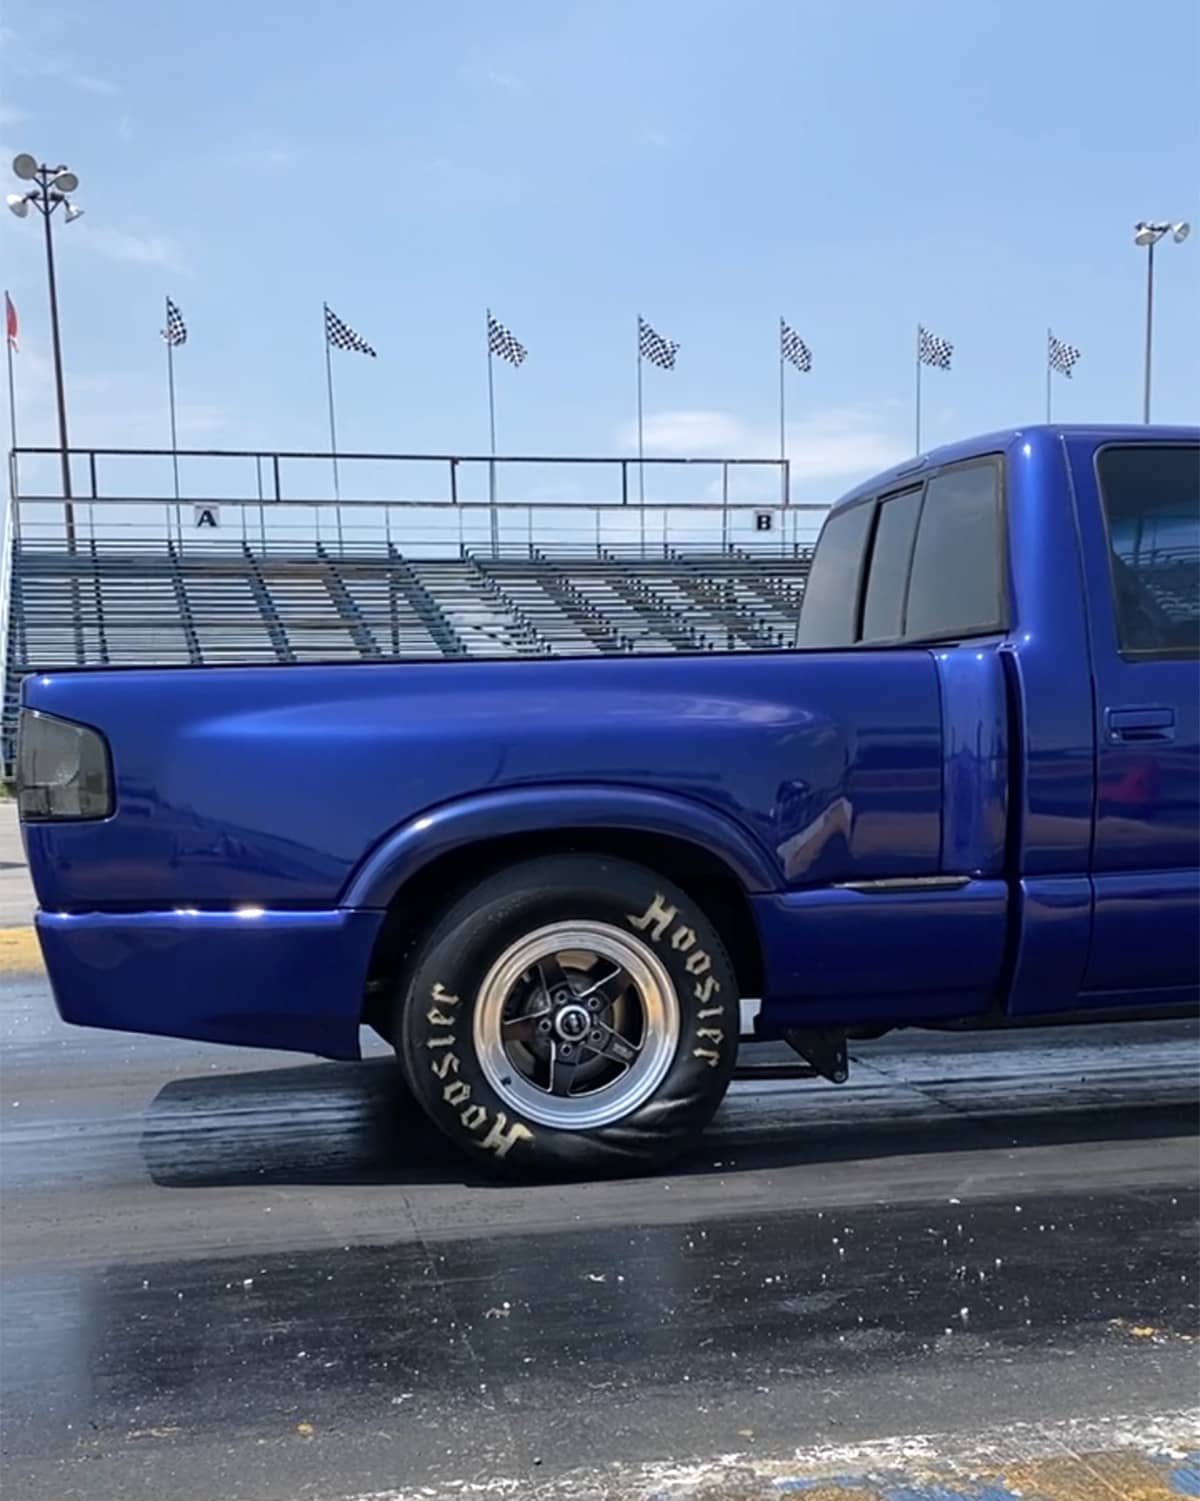 Chevy S10 / GMC Sonoma Hoosier drag tires and Weld S71 drag rims.